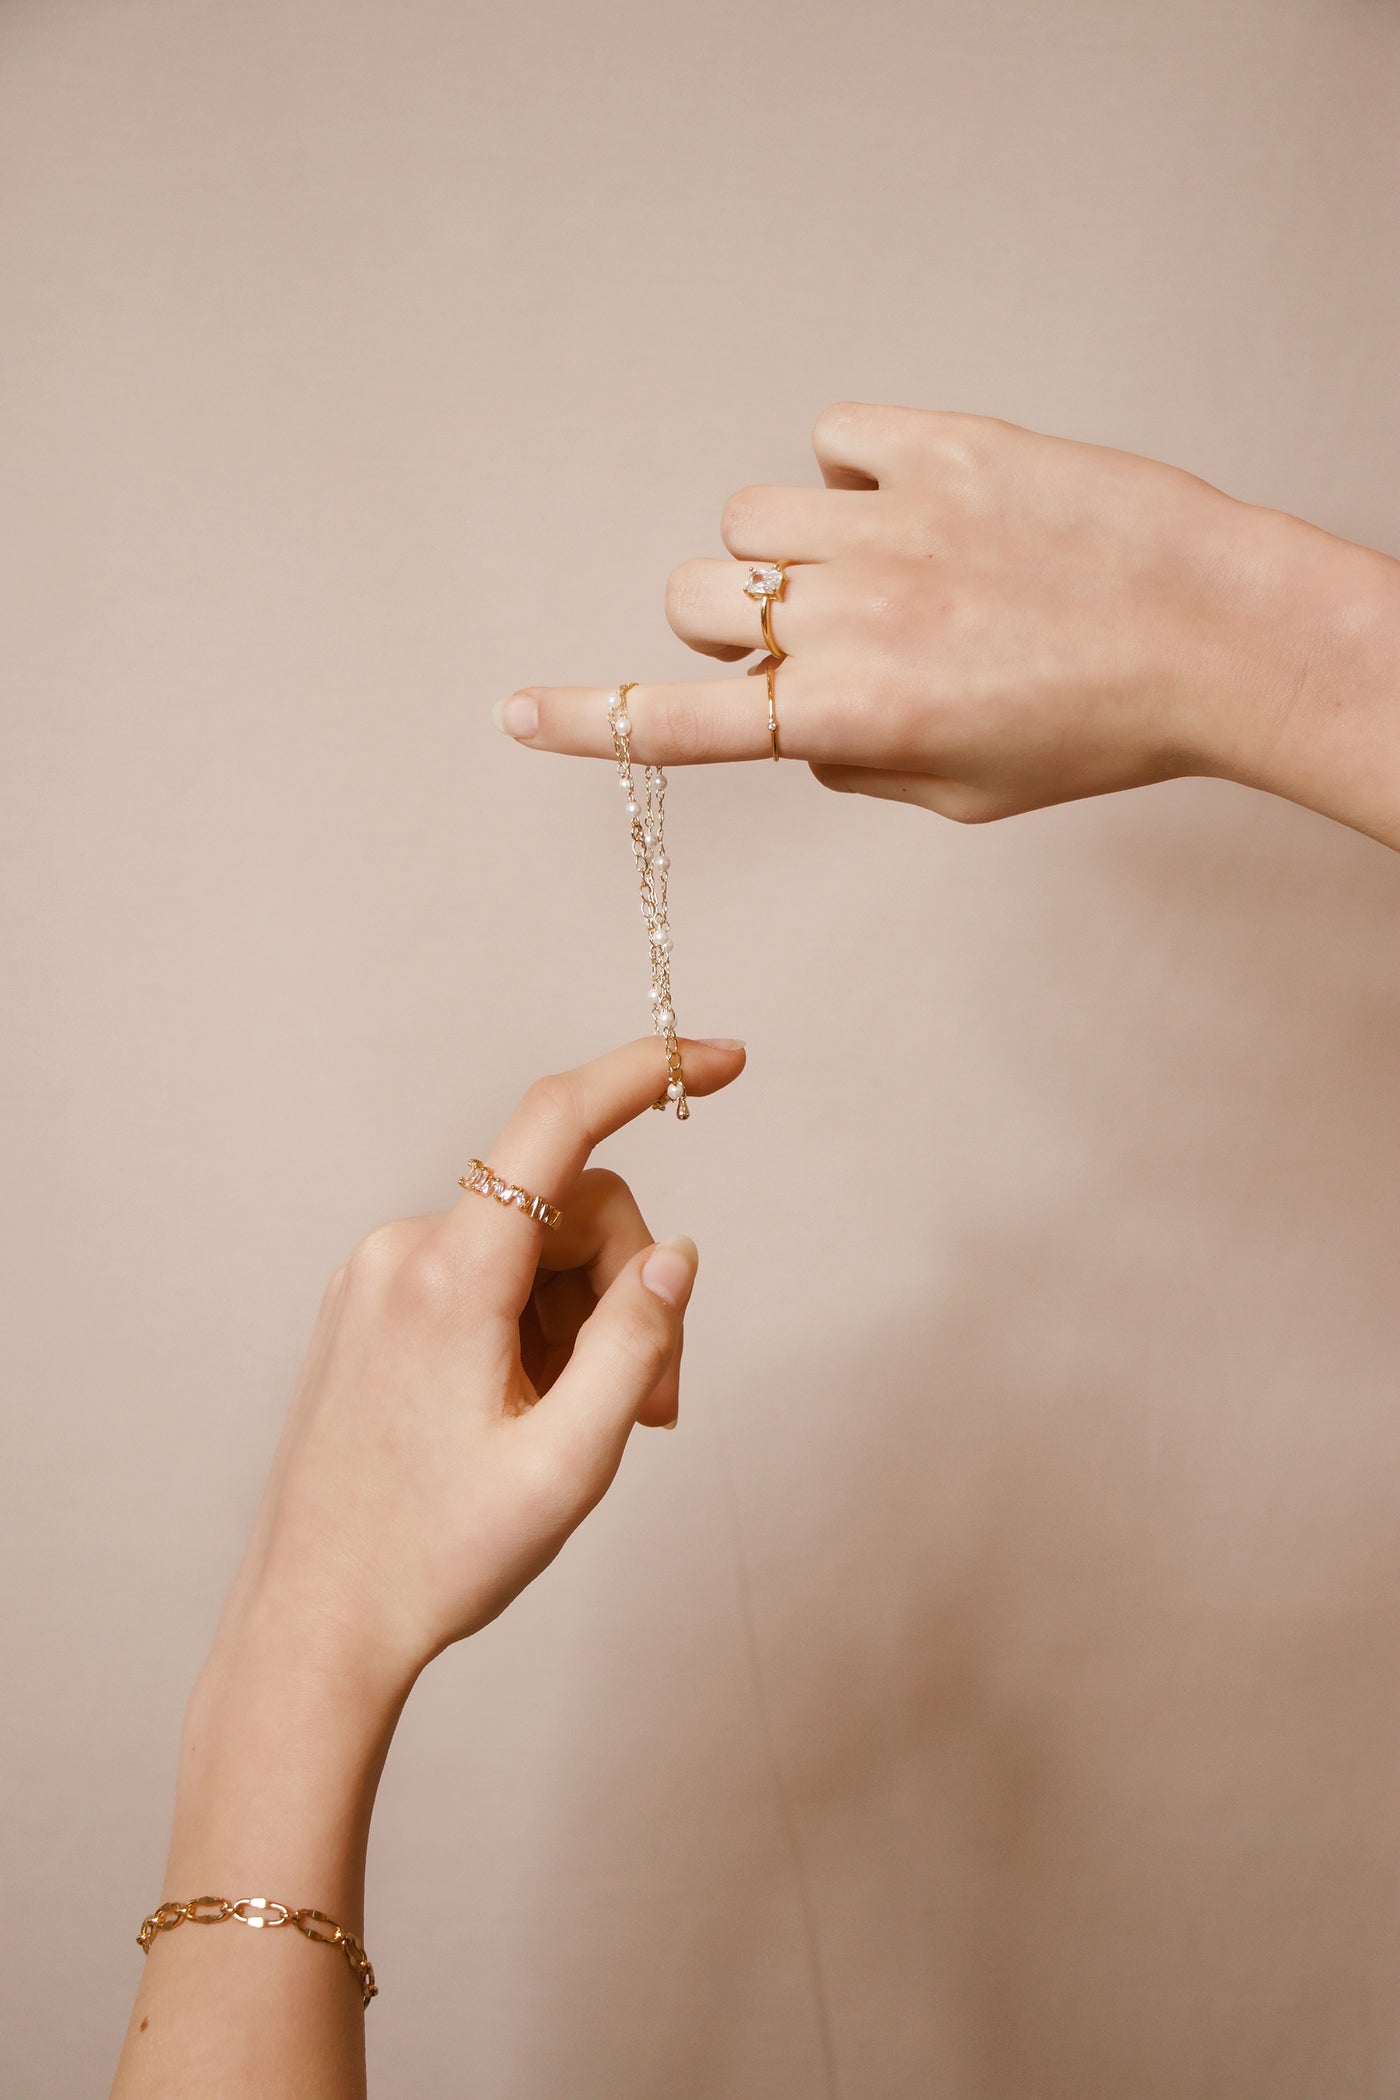 The most beautiful jewelry to capture the love for your little one